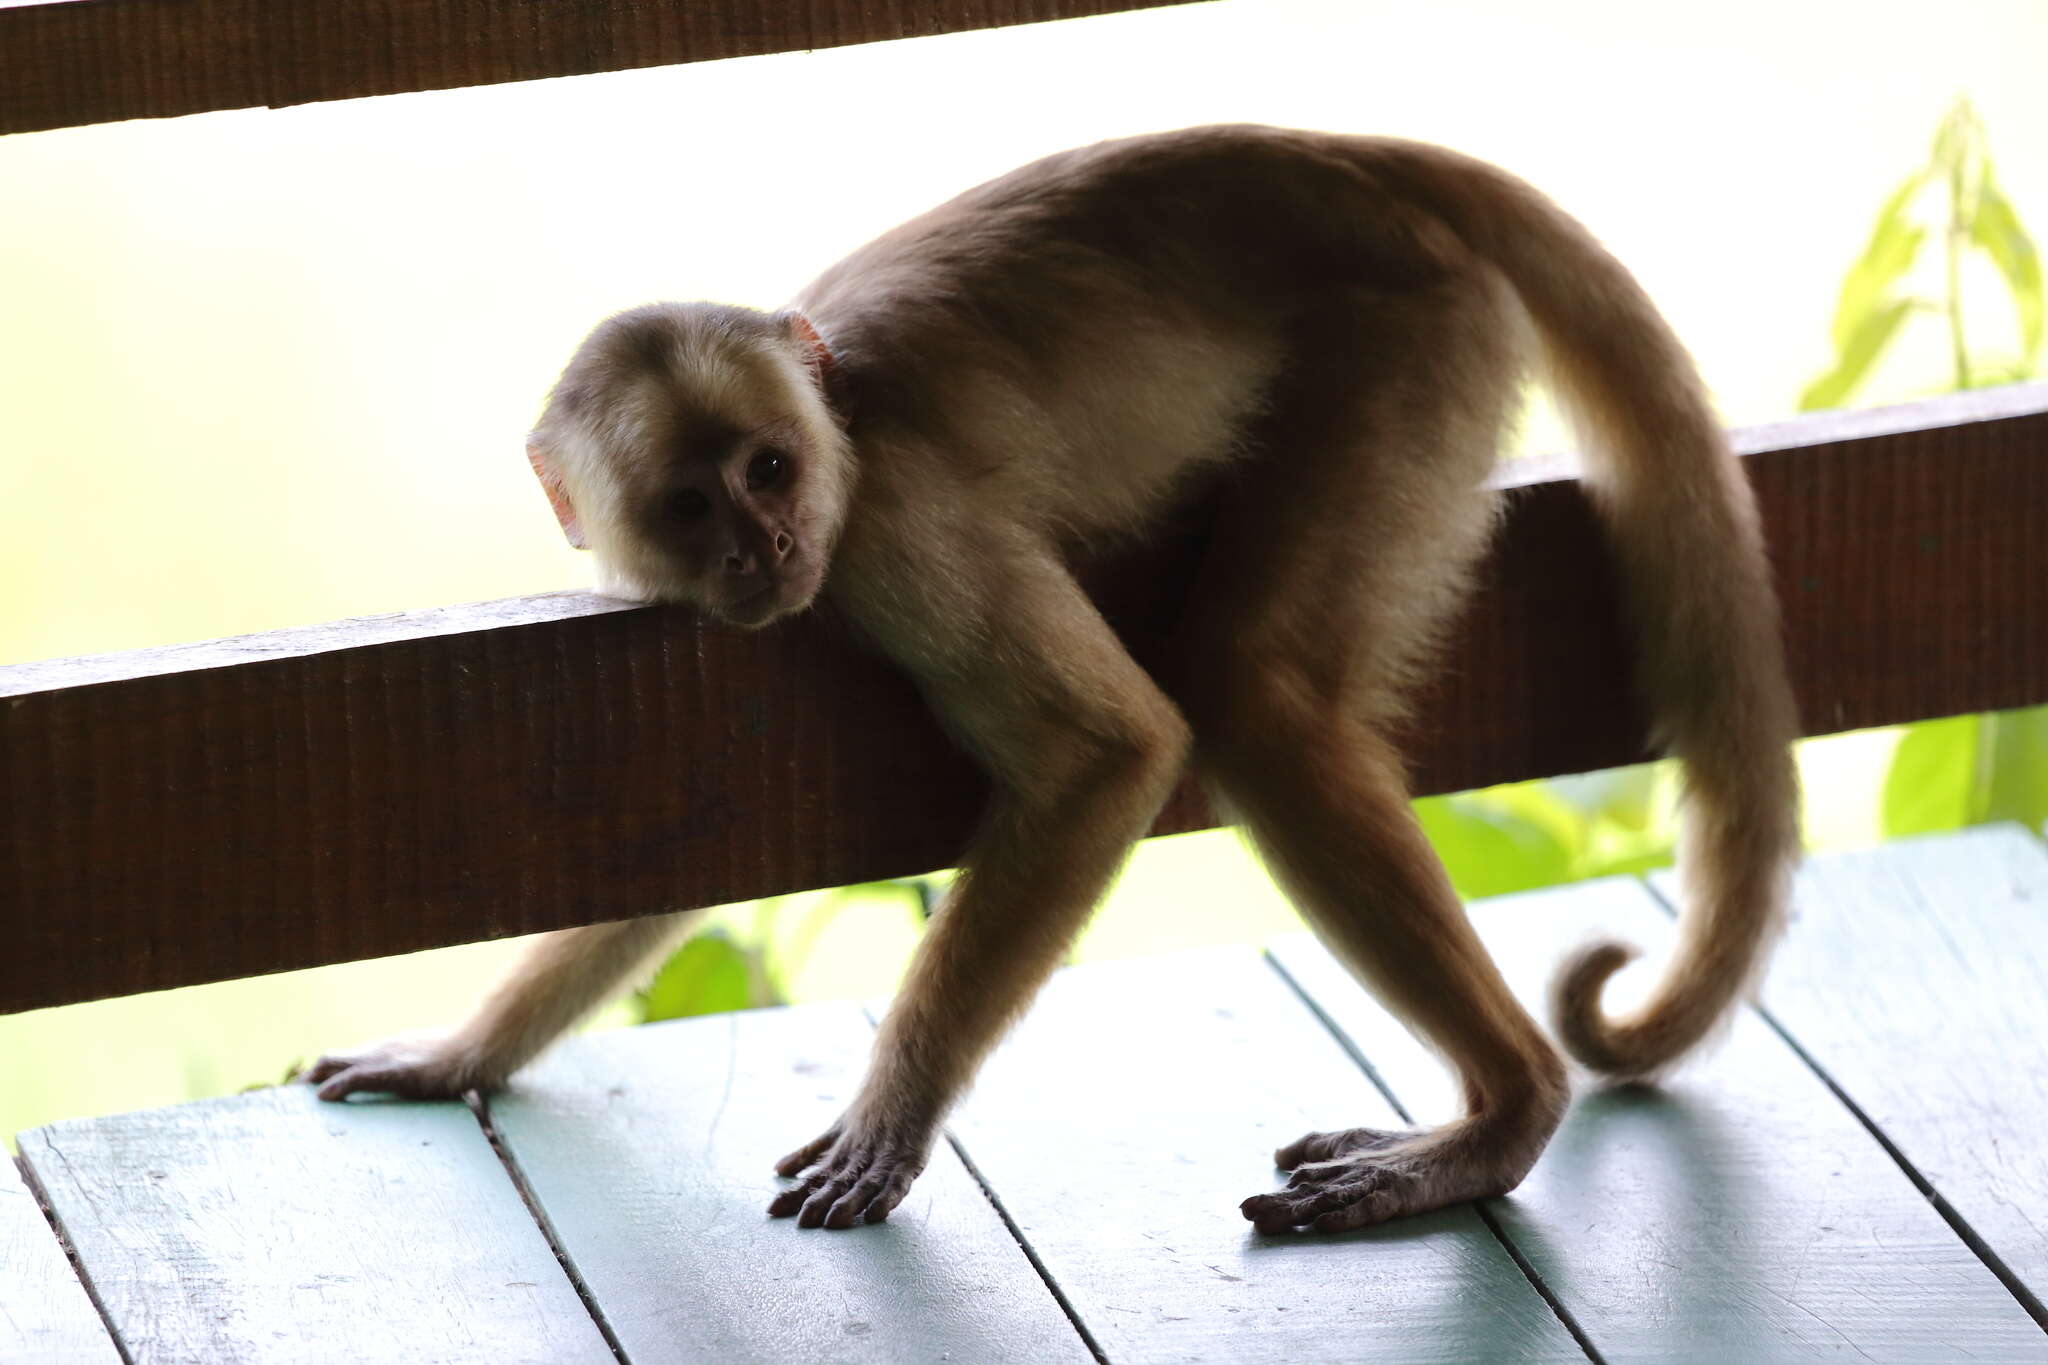 Image of White-fronted Capuchin